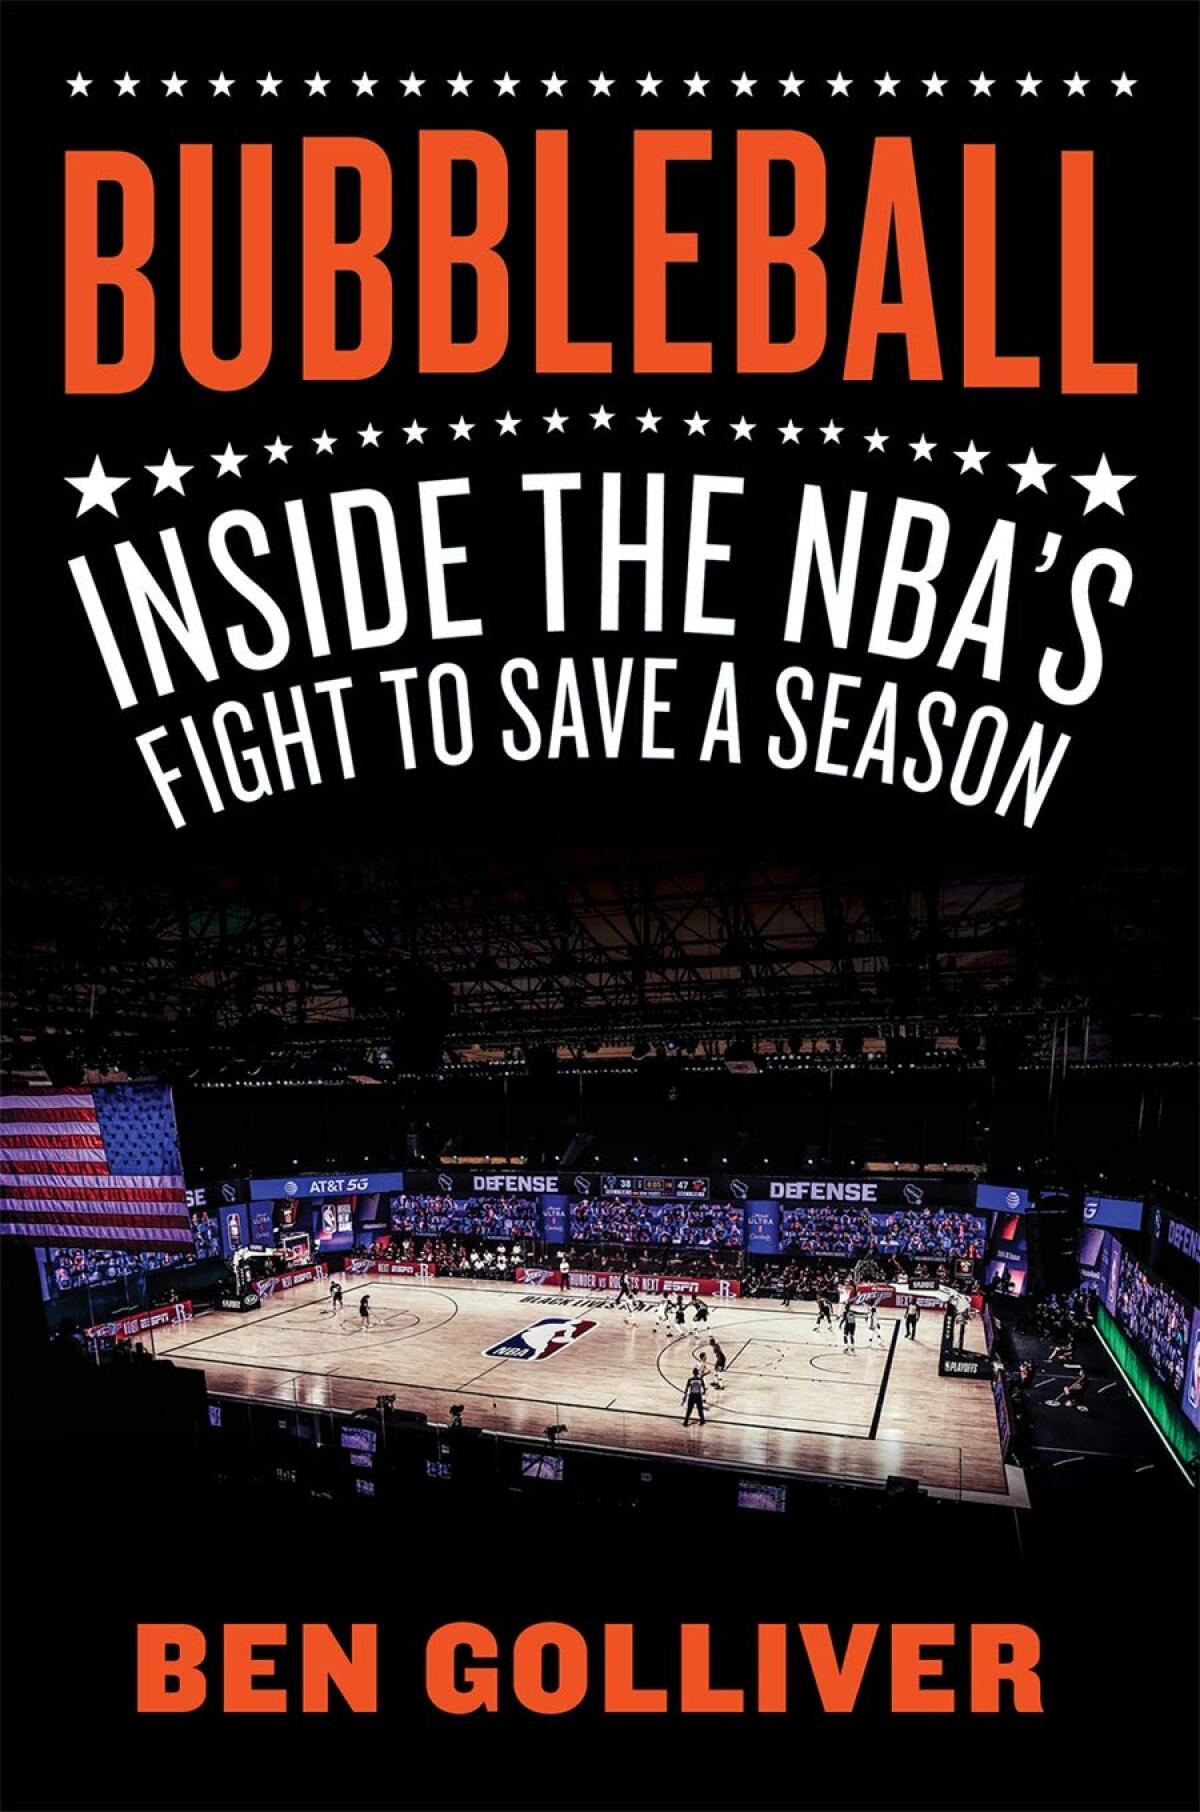 "Bubbleball: Inside the NBA's Fight to Save a Season" by Ben Golliver